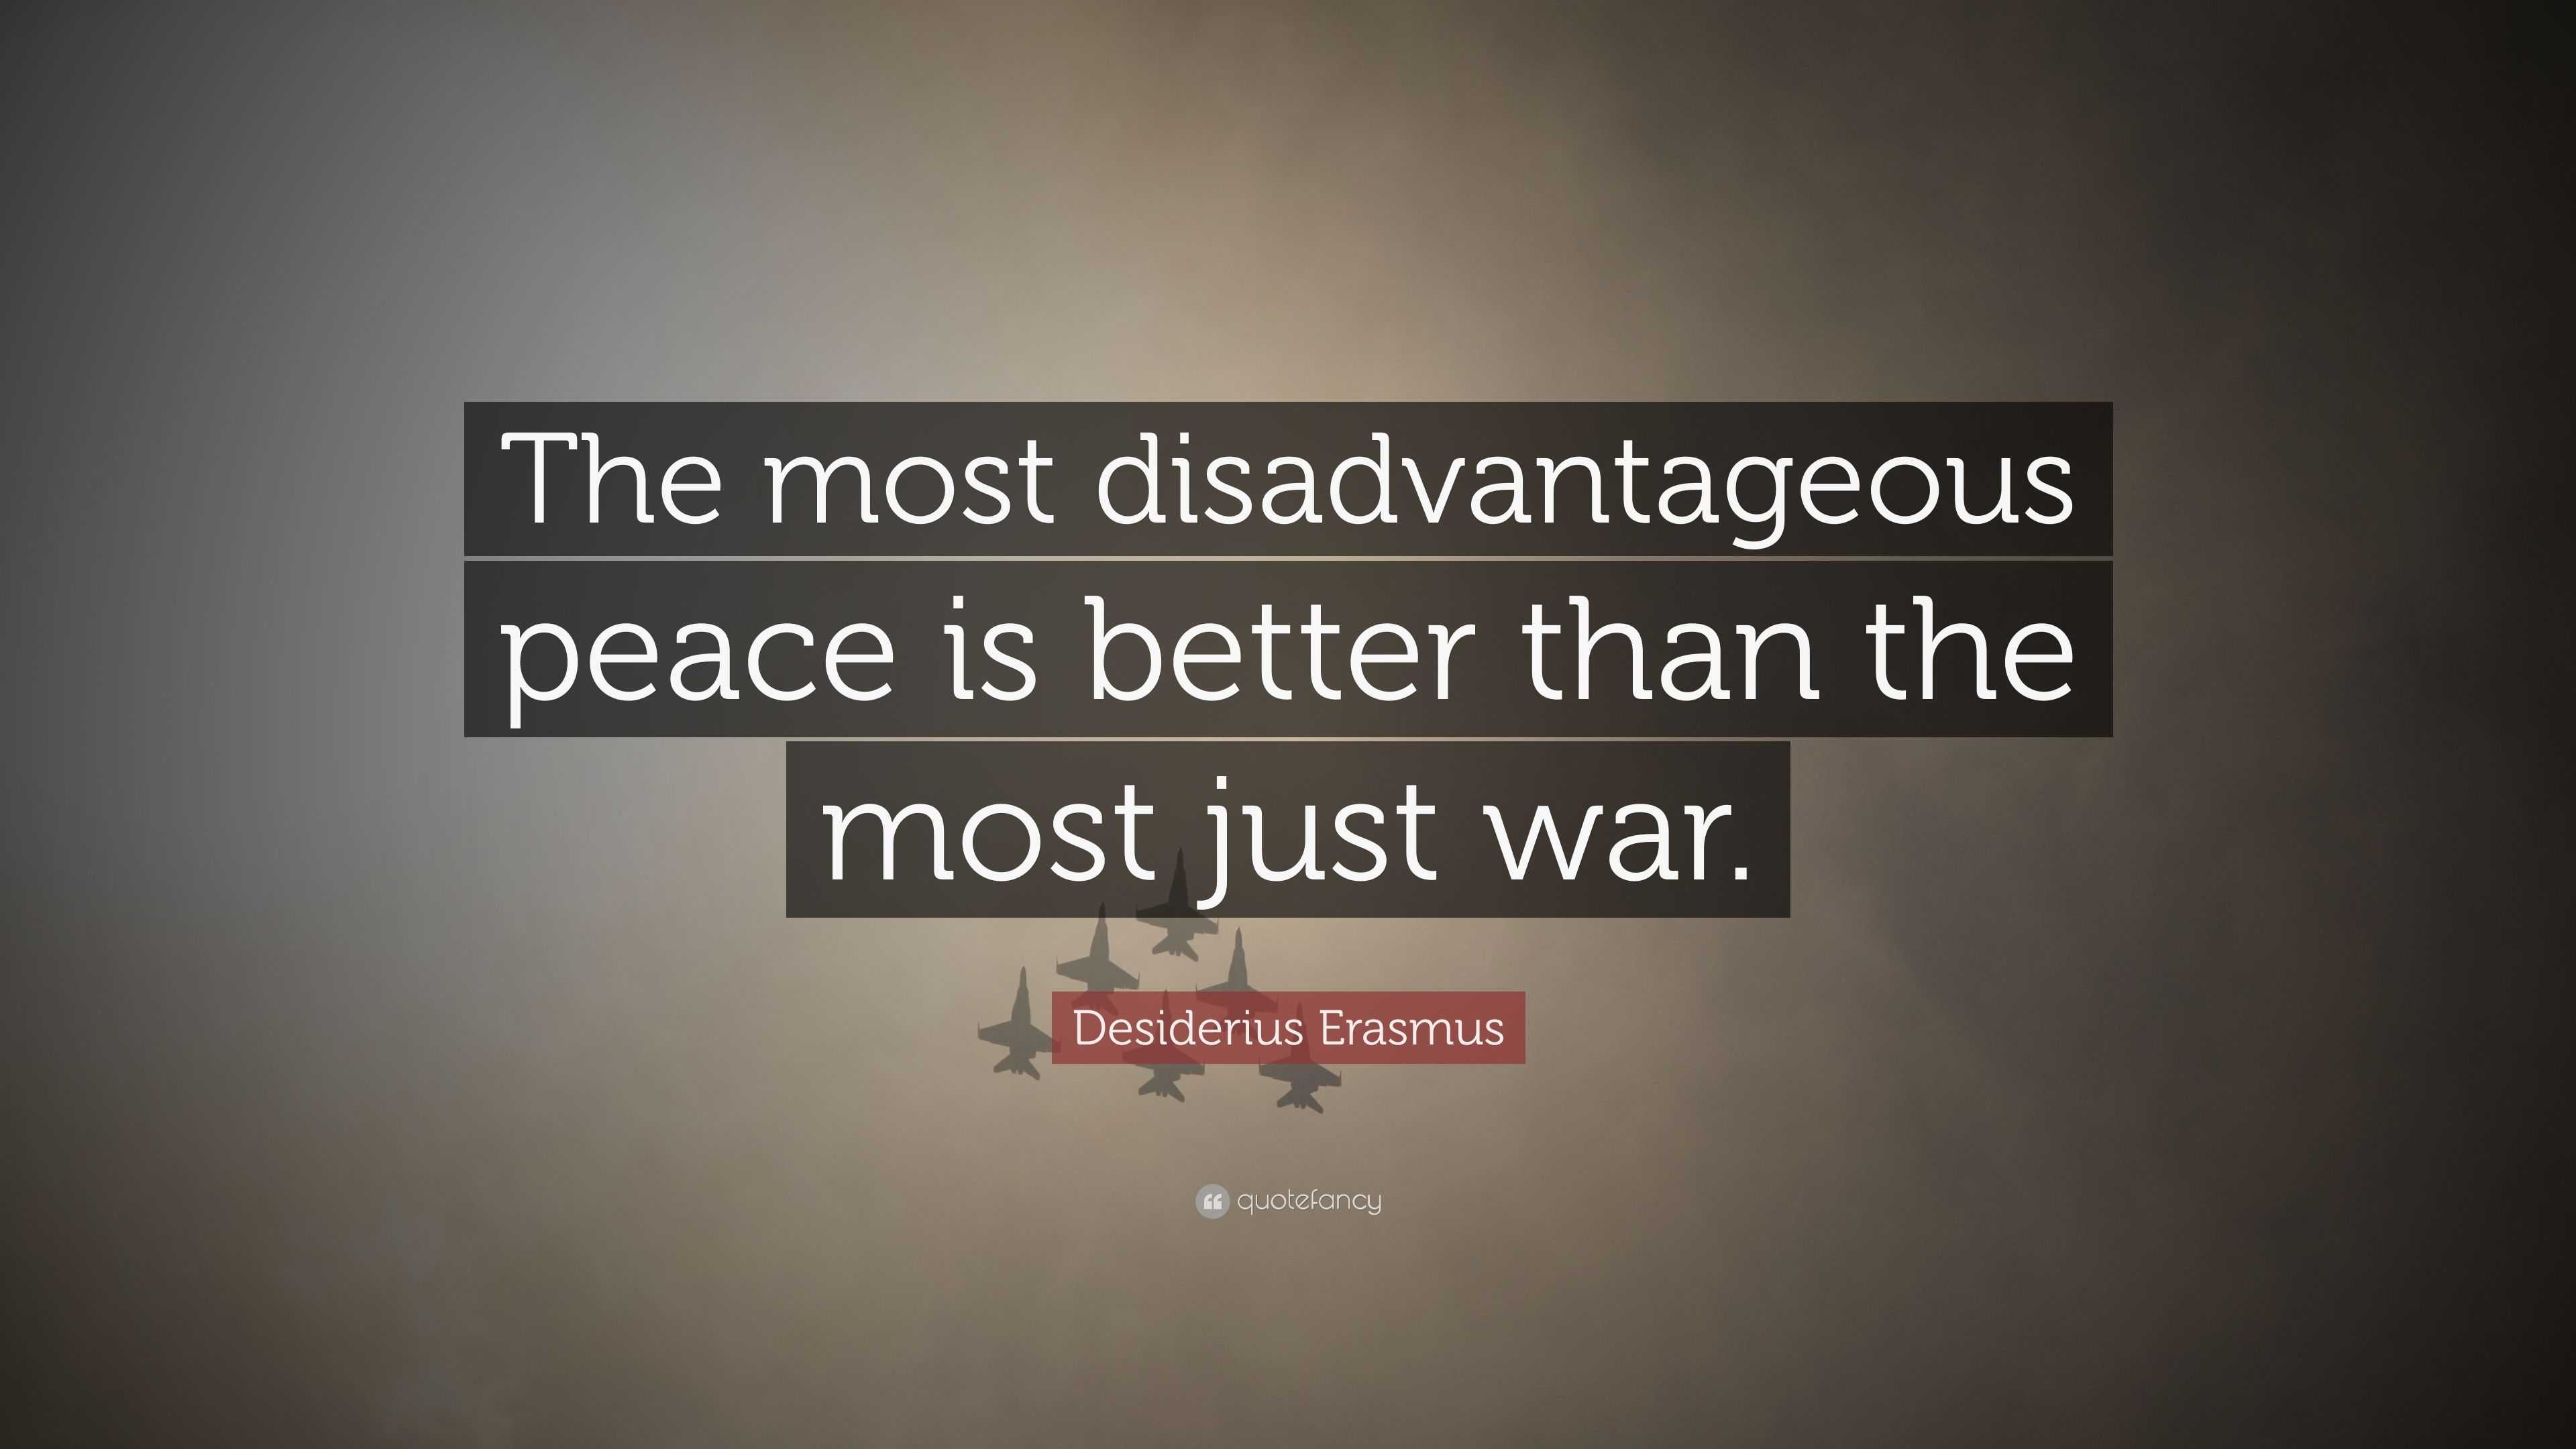 Desiderius Erasmus Quote: “The most disadvantageous peace is better ...